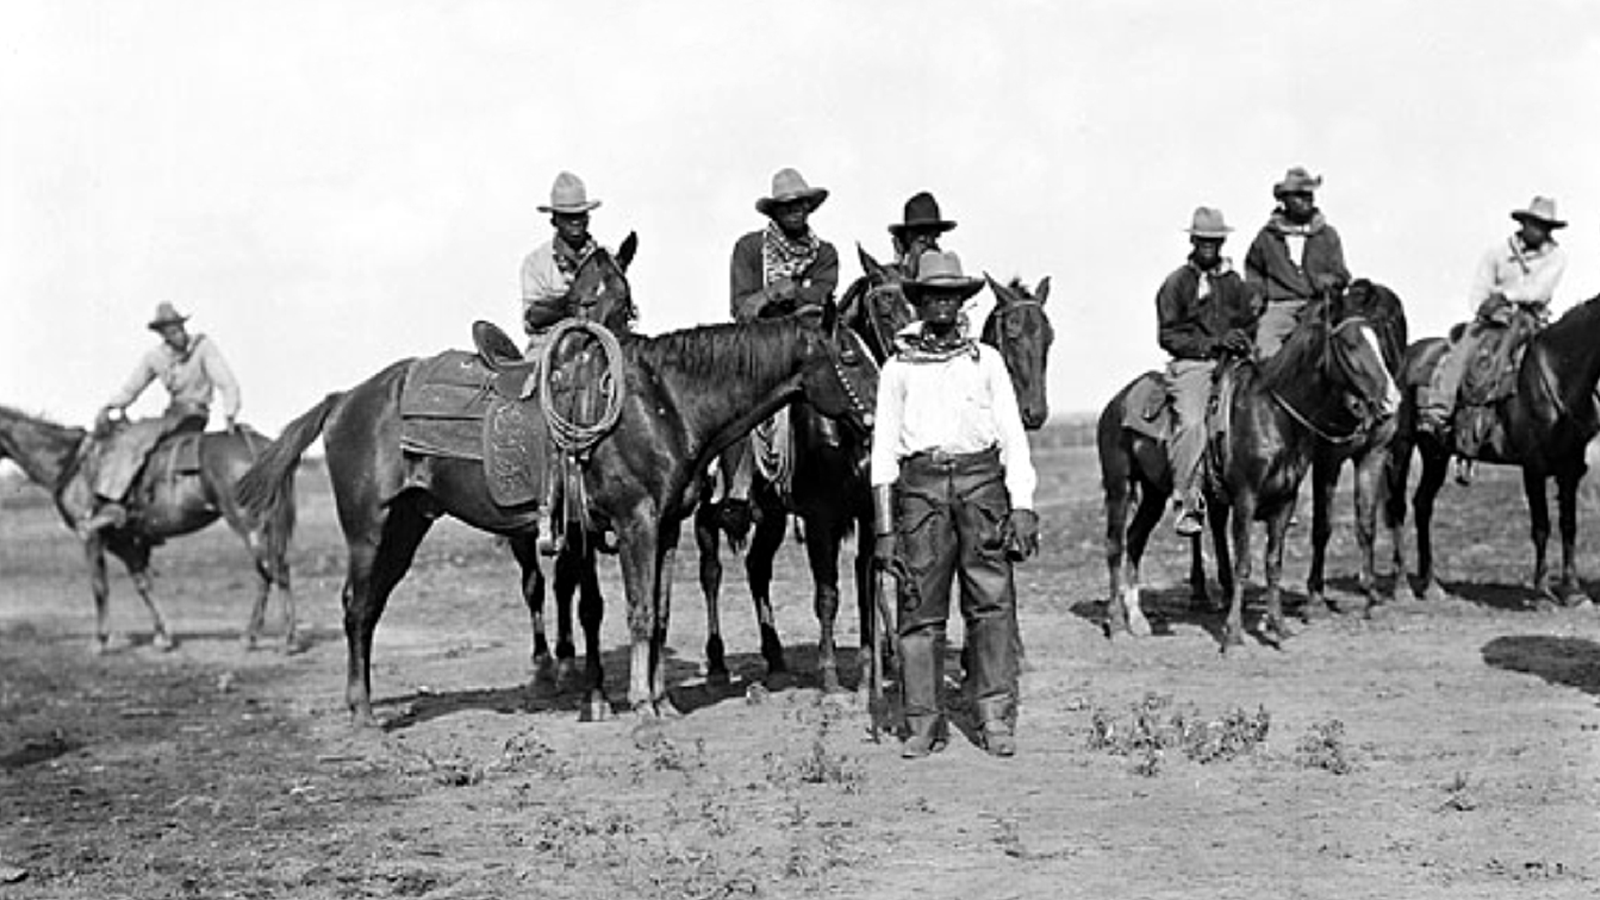 Teaching about the American West: Vaqueros